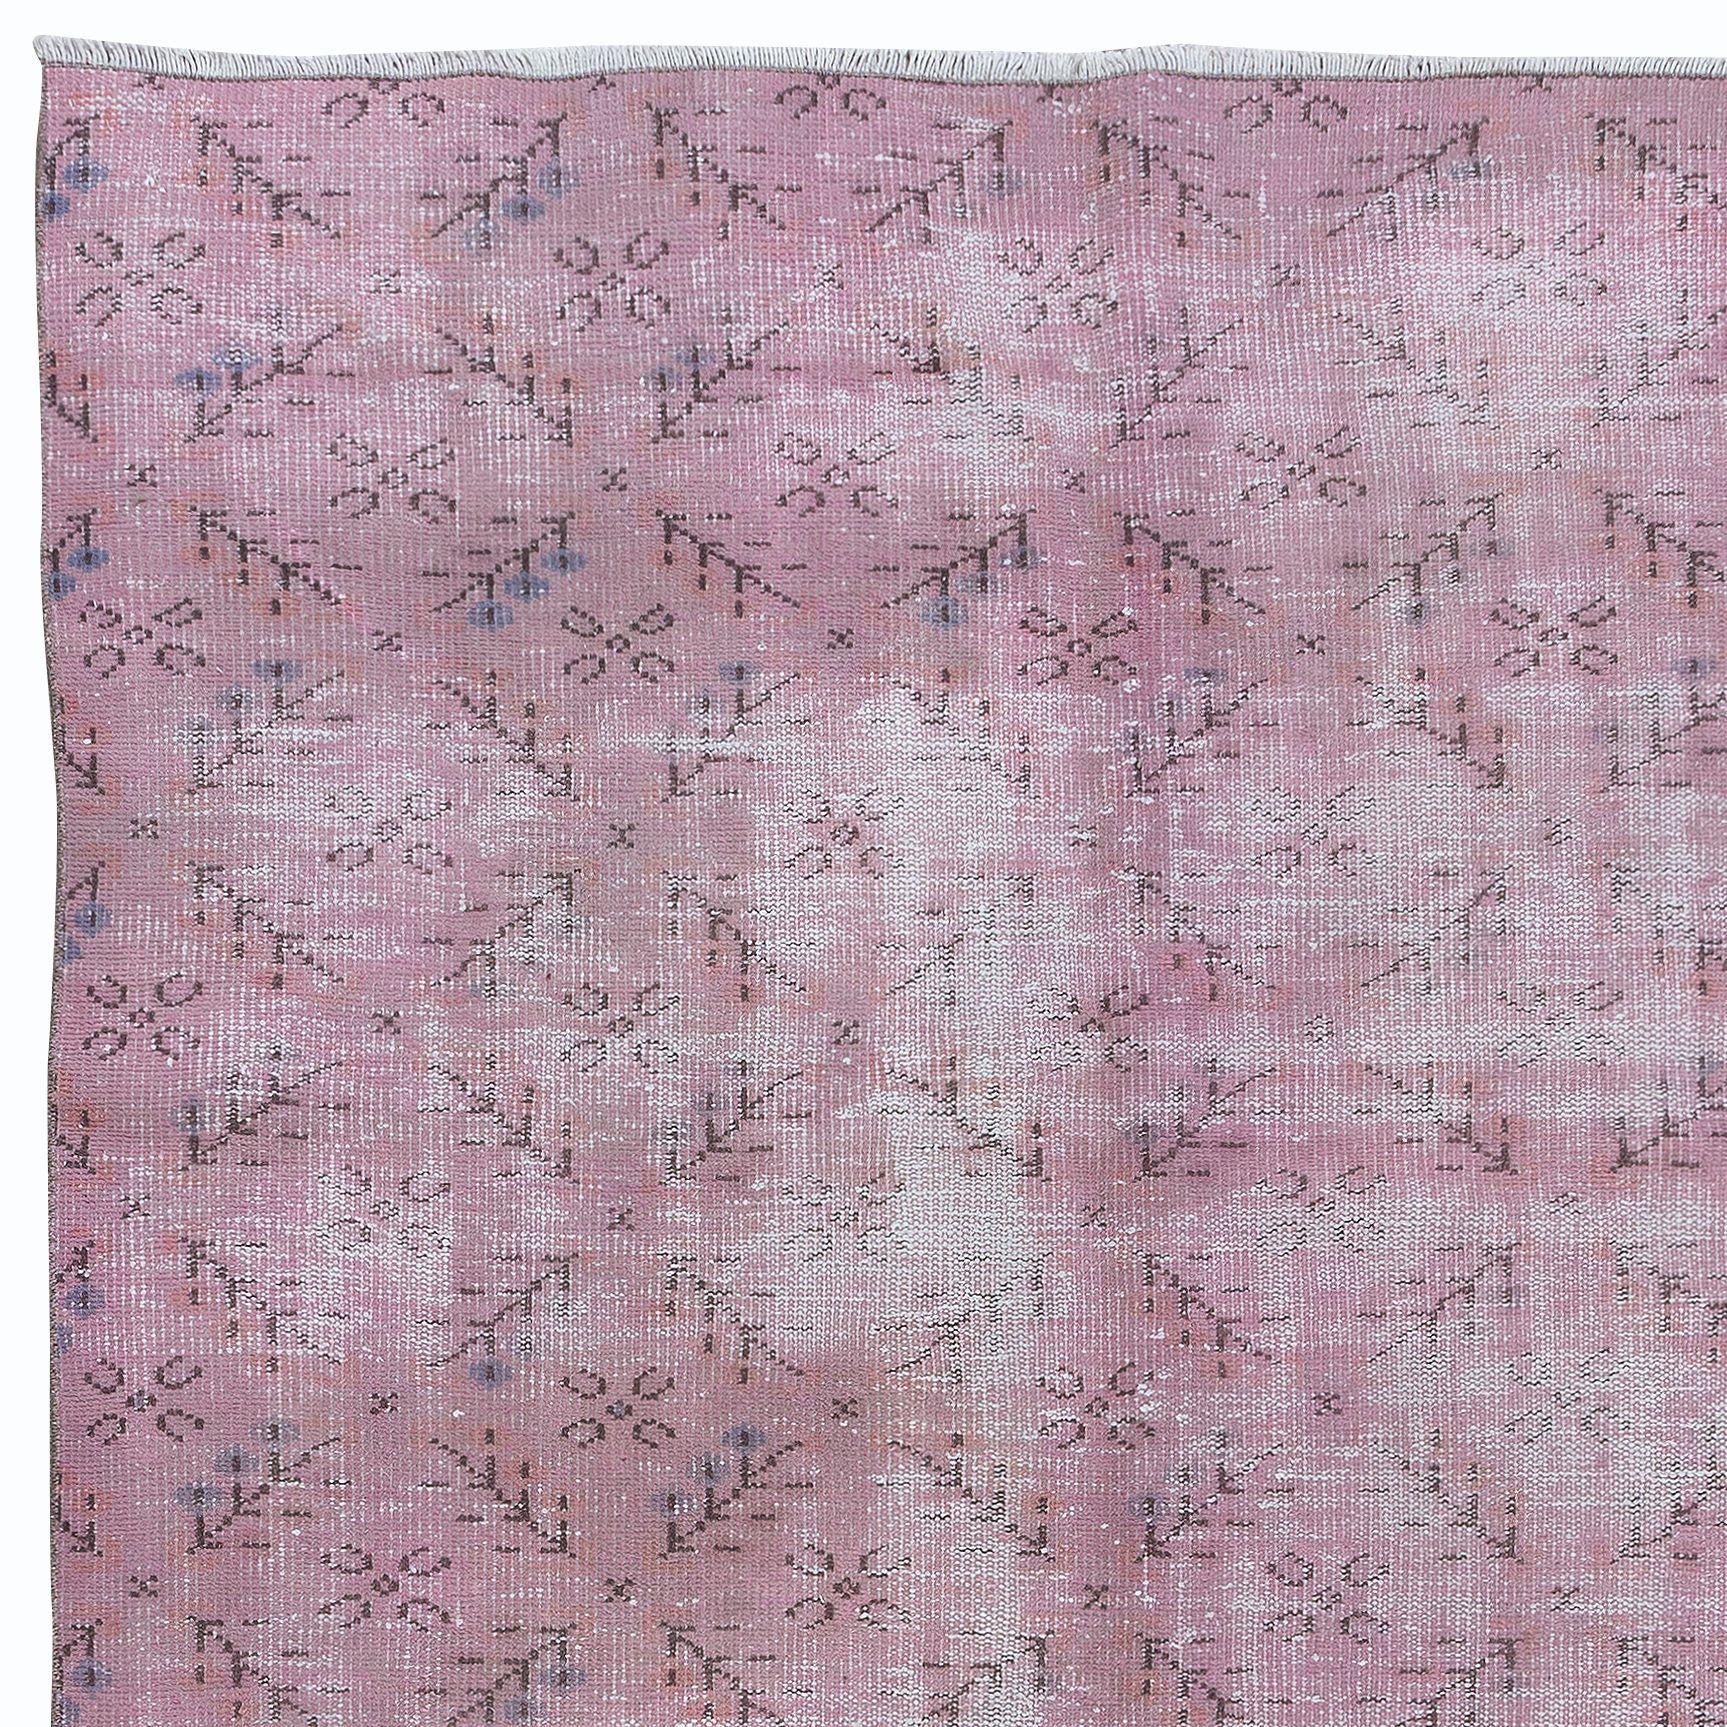 Hand-Woven 5.4x8.5 Ft Handmade Area Rug in Soft Pink, Modern Turkish Wool Carpet For Sale